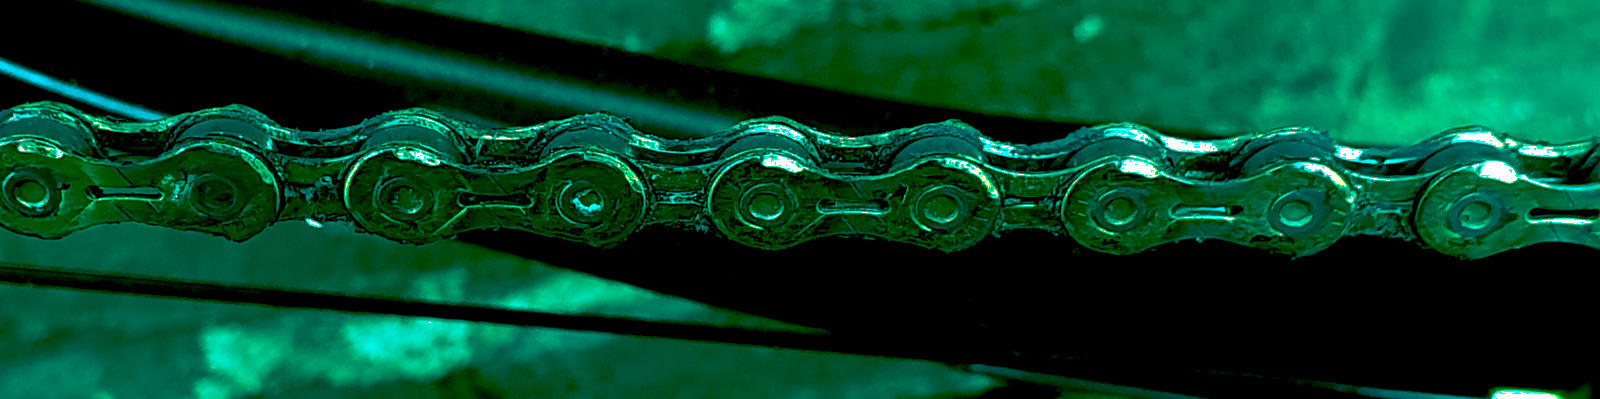 waxed chain with green filter